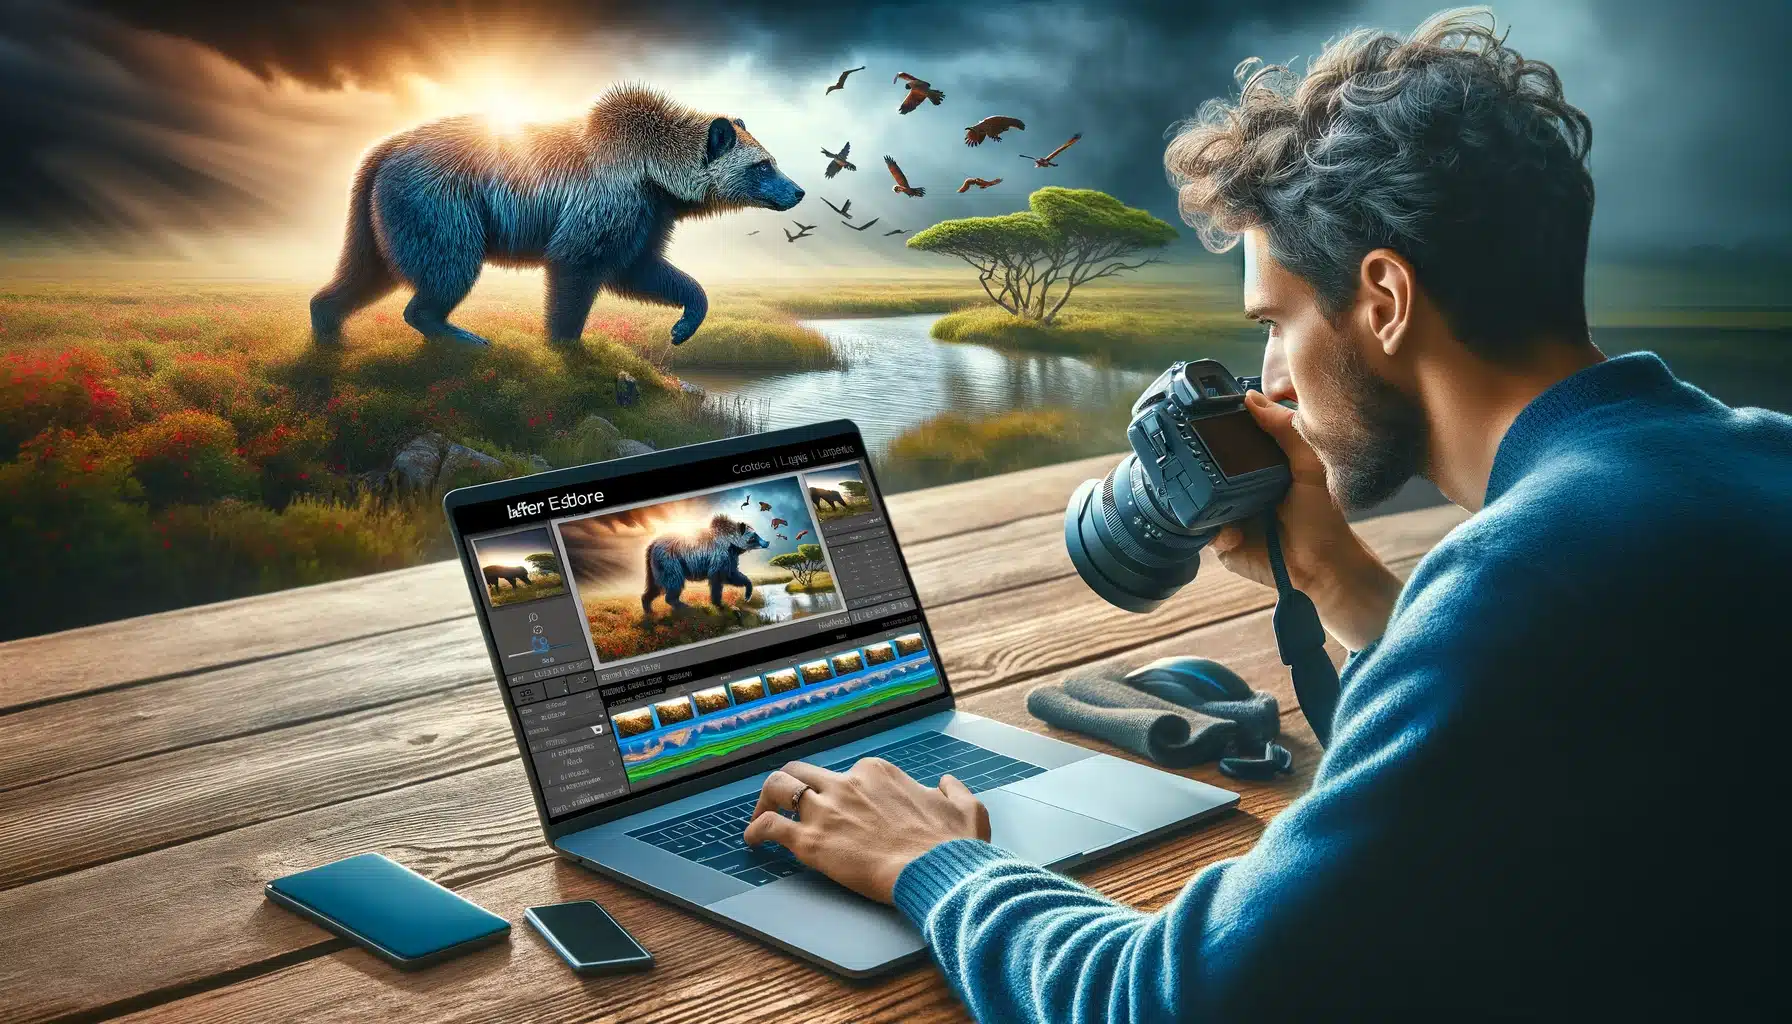 Photographer in a natural setting editing wildlife photos on a laptop, showing before and after enhancements, demonstrating professional editing techniques.